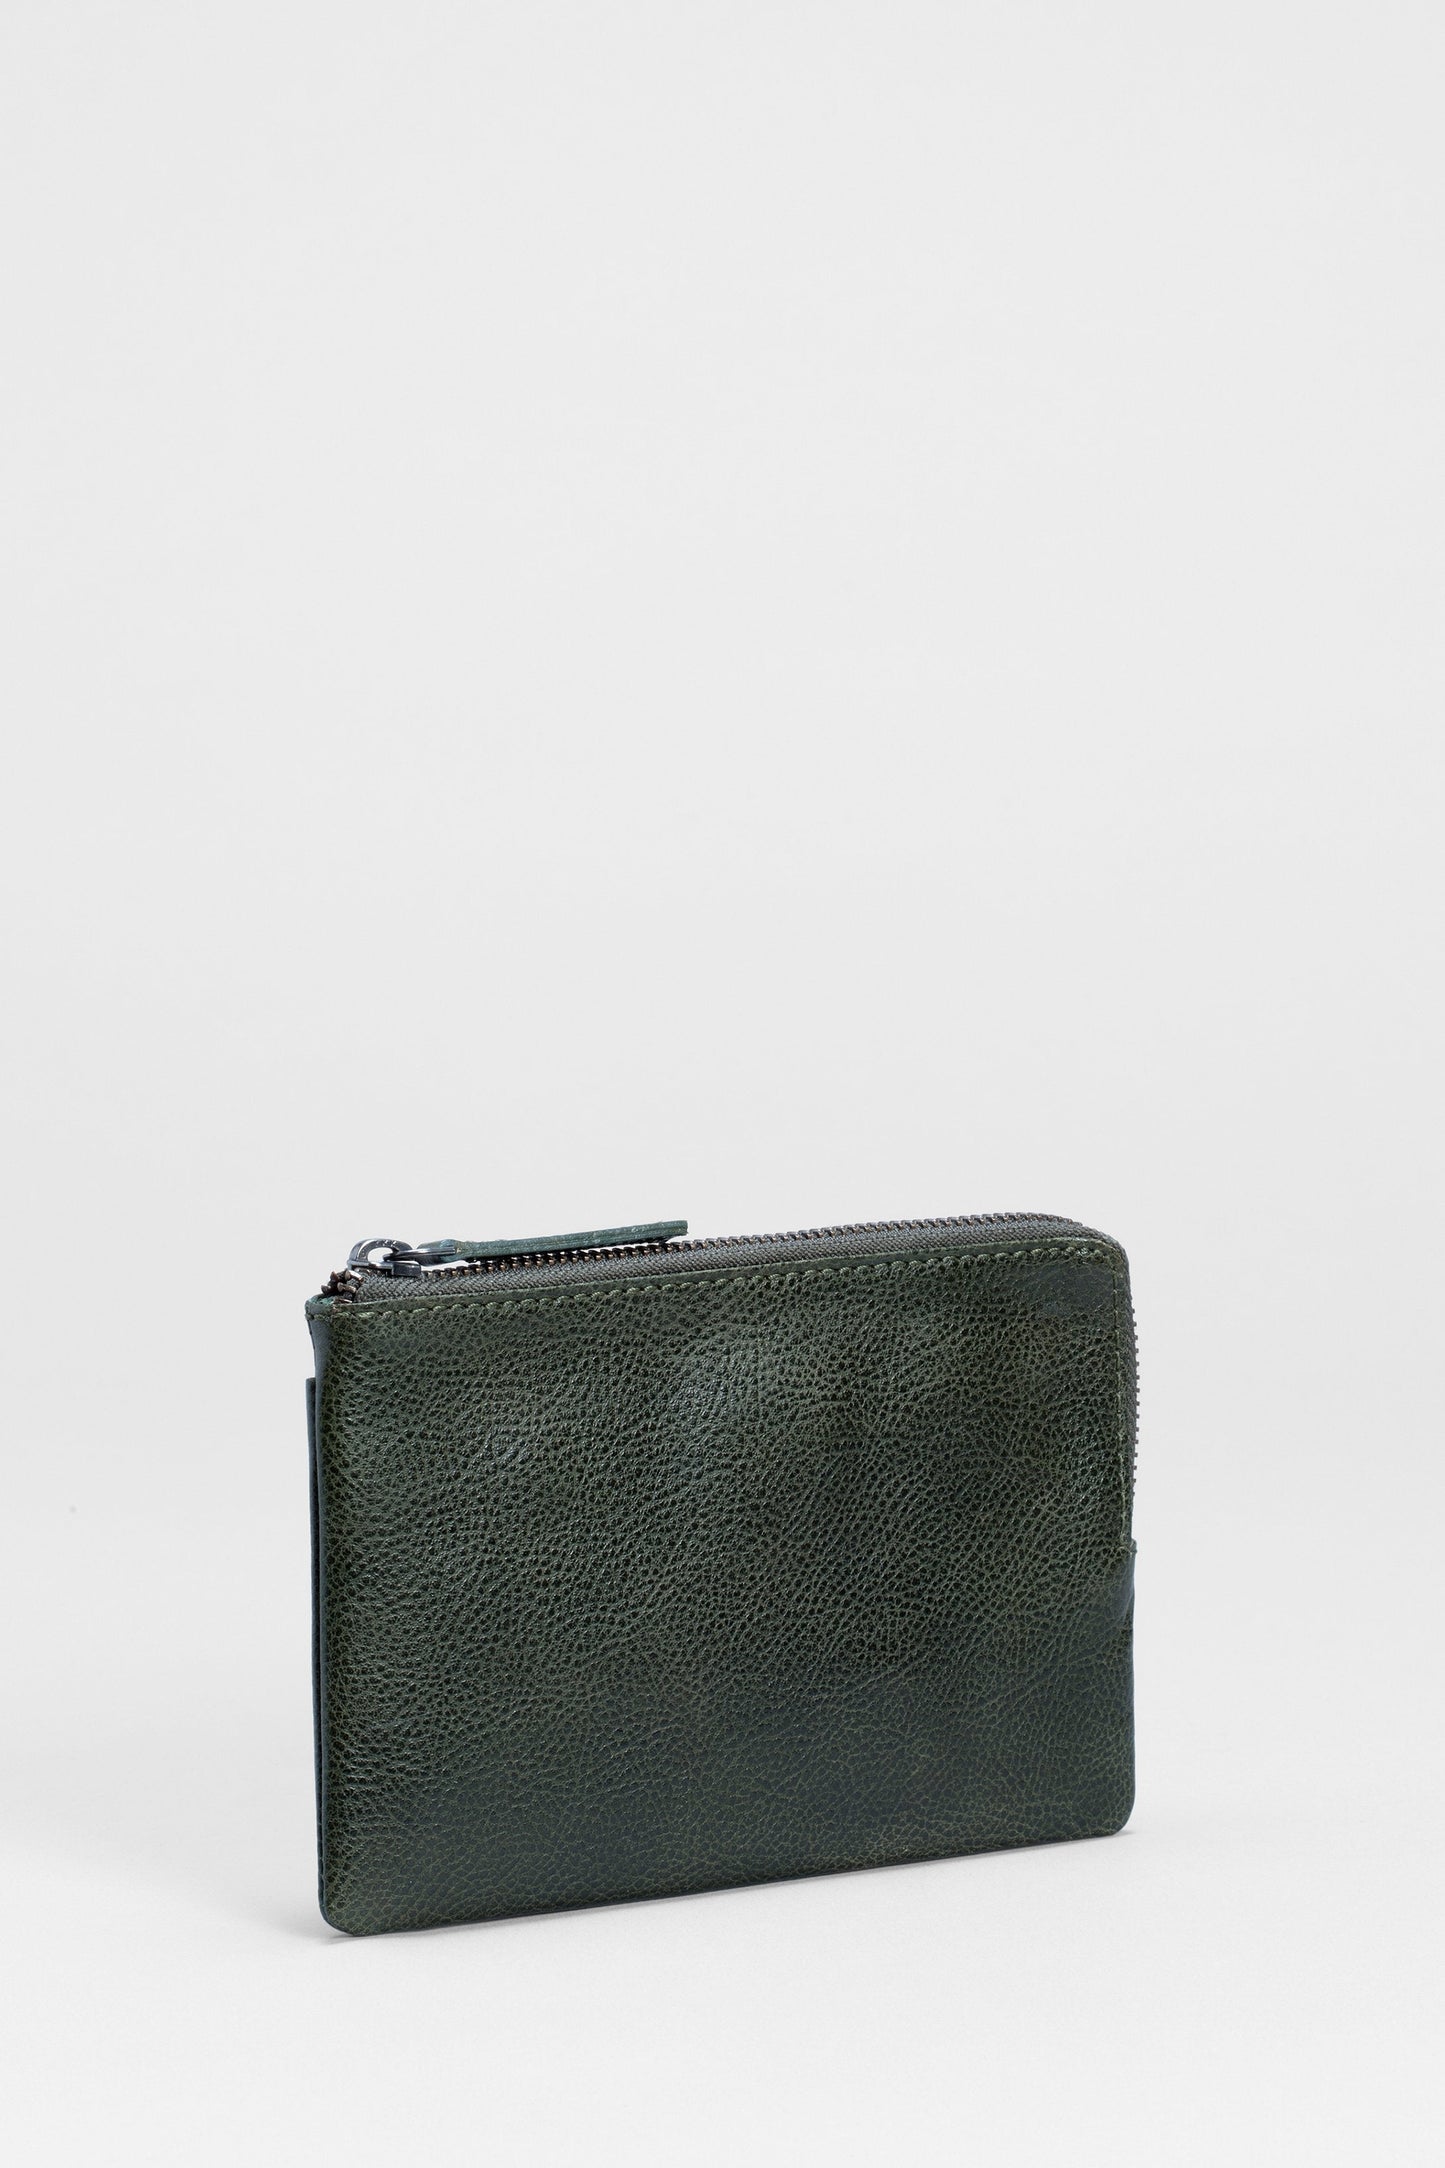 Kaia Zip Remnant Cow Leather Coin Purse Pouch Front | OLIVE